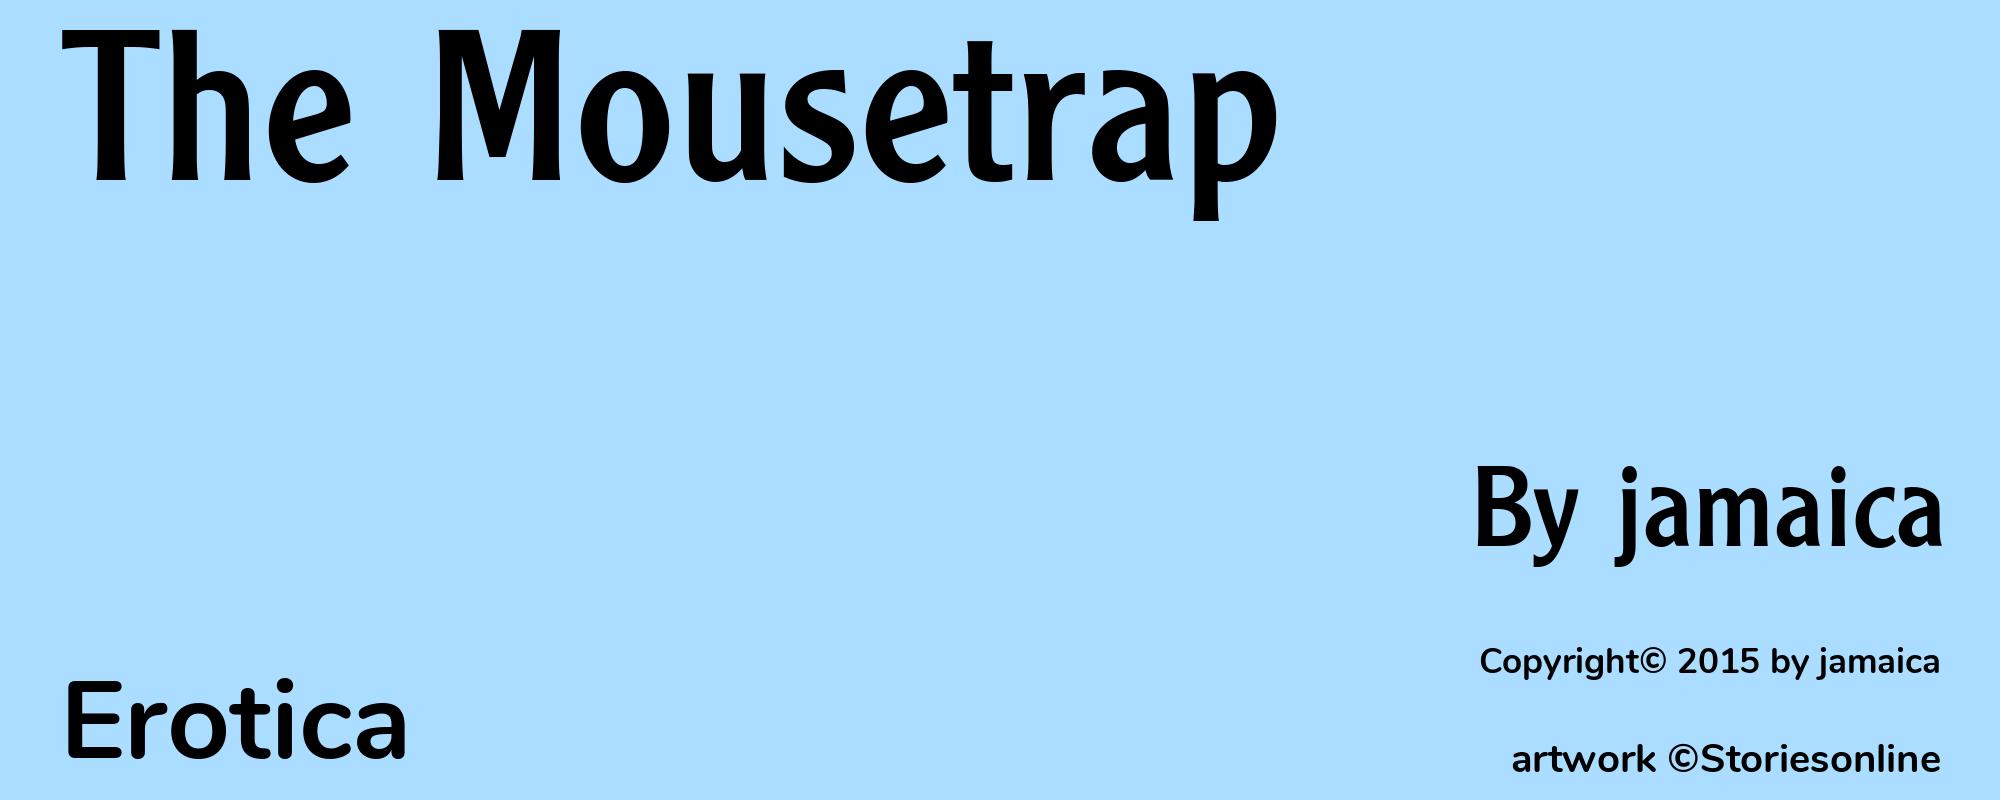 The Mousetrap - Cover